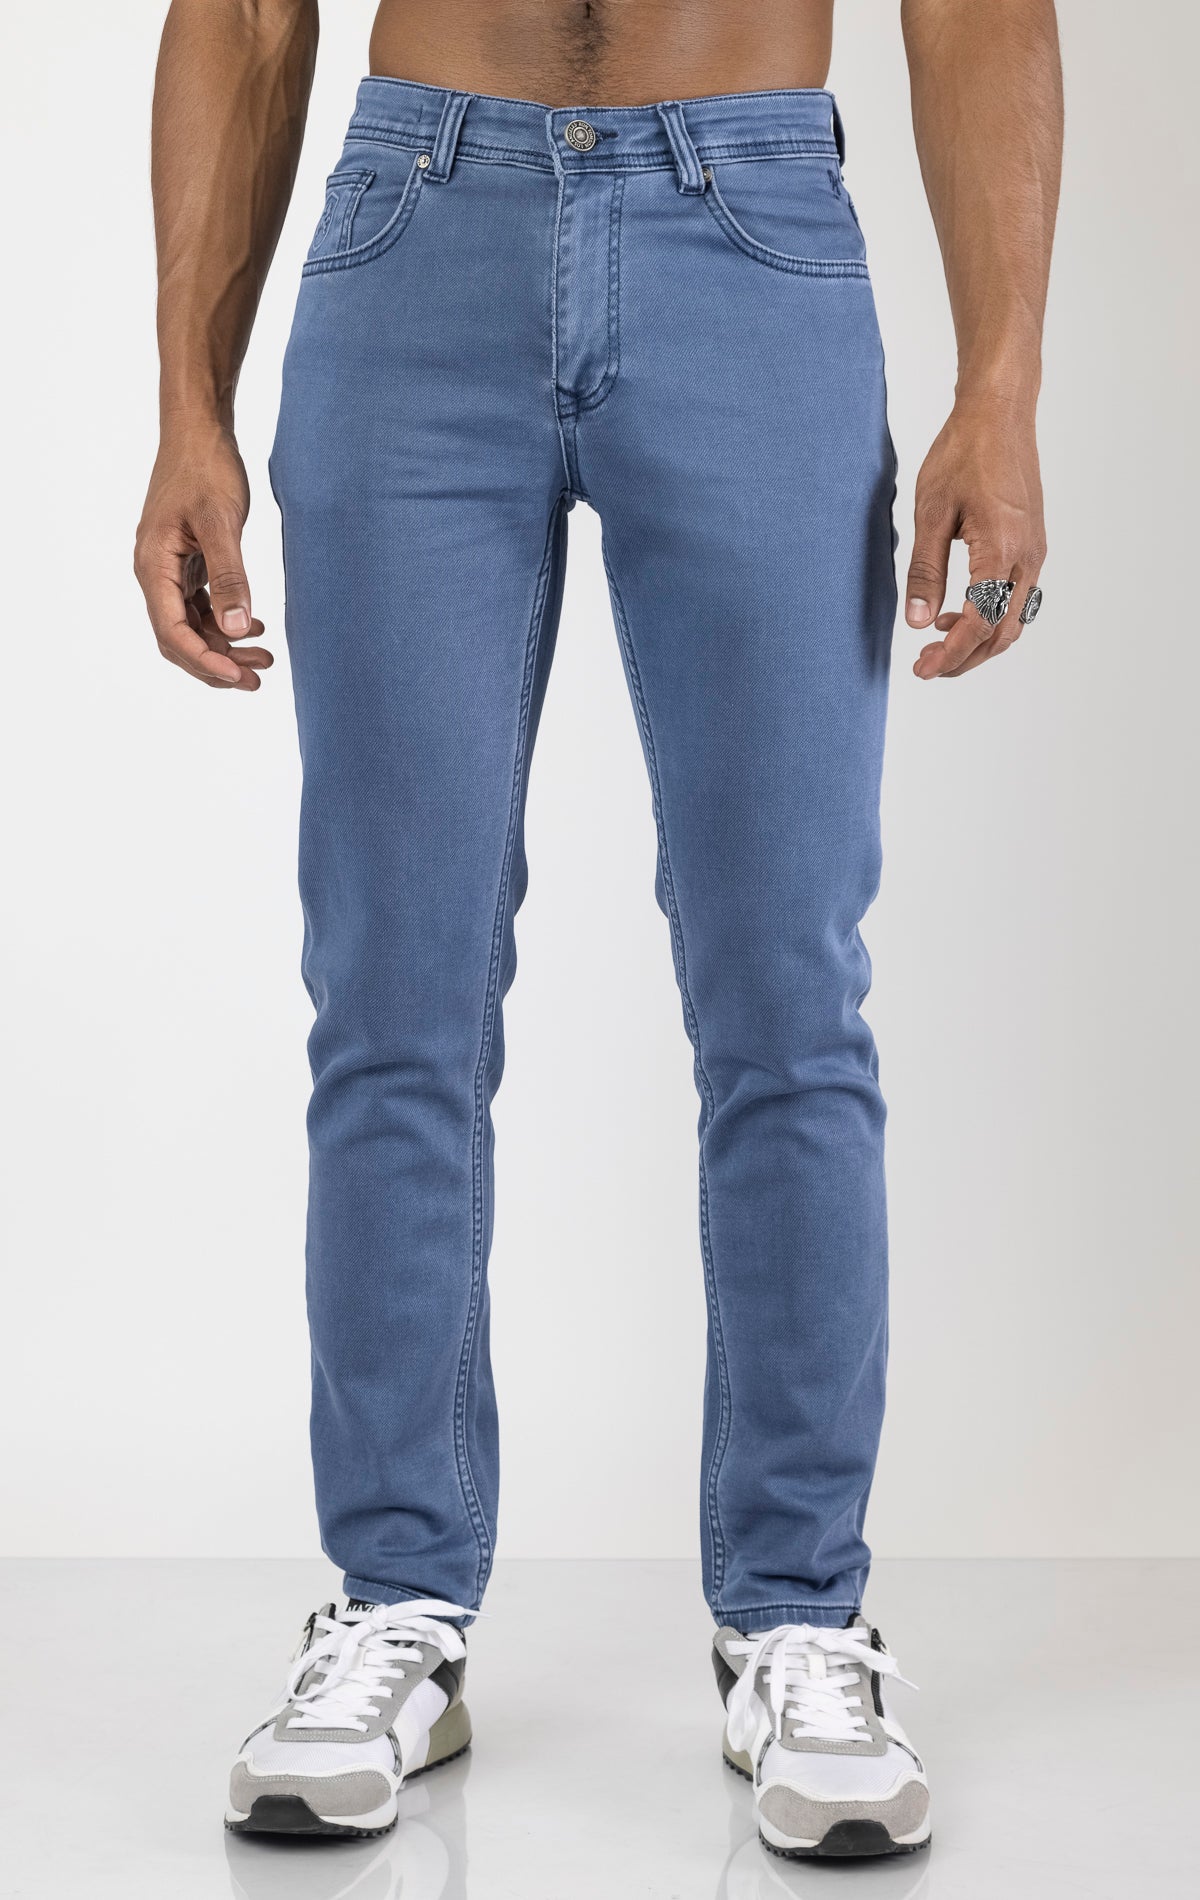 Men's super soft 5-pocket style pants in indigo color. The pants are made from a 98% cotton, 2% elastane blend and feature a tailored fit with a hint of stretch, classic 5-pocket styling (two front pockets, two back pockets, and a coin pocket).